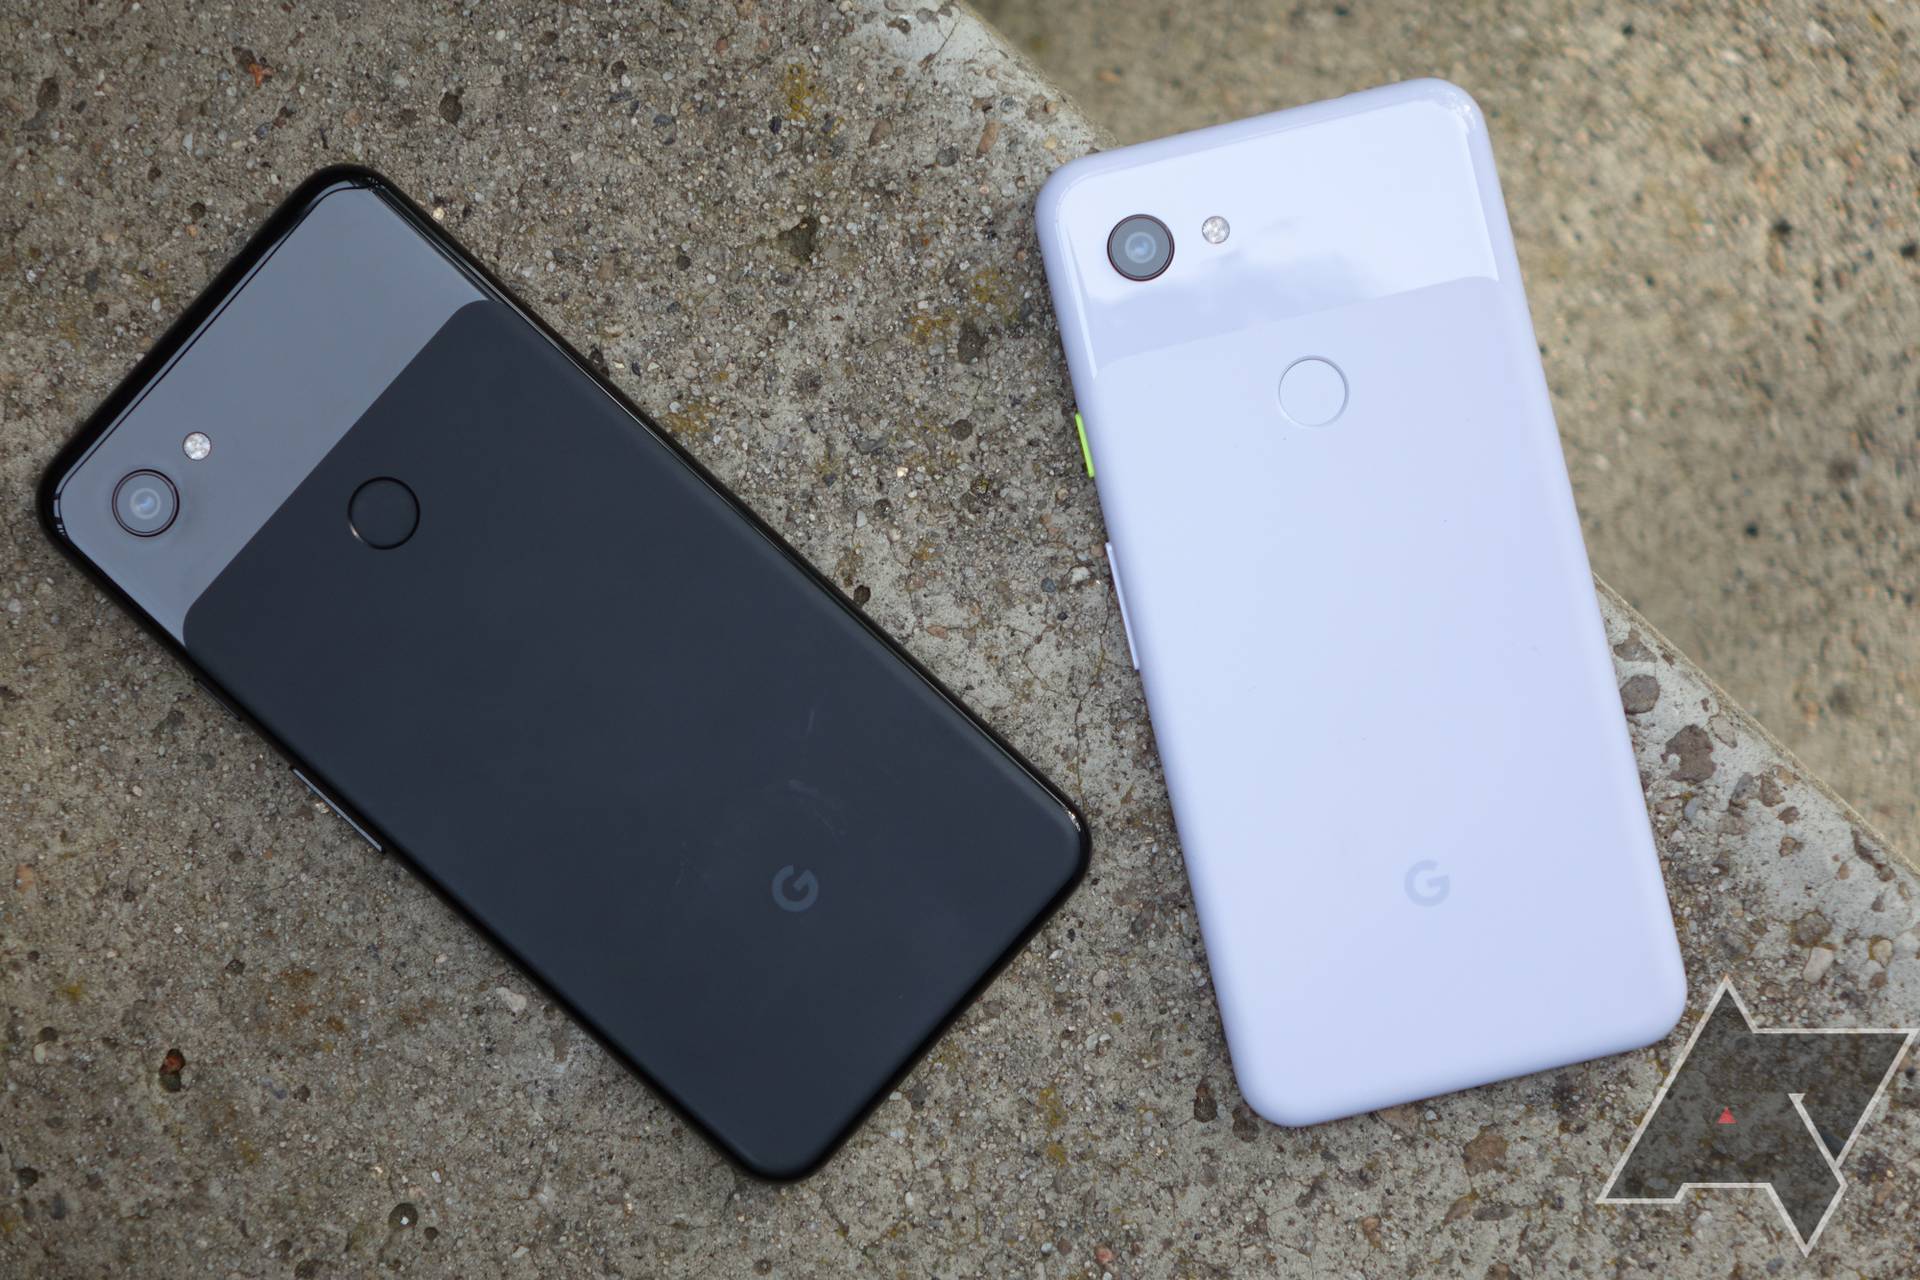 Google delivers its final security patch for the Pixel 3a and 3a XL